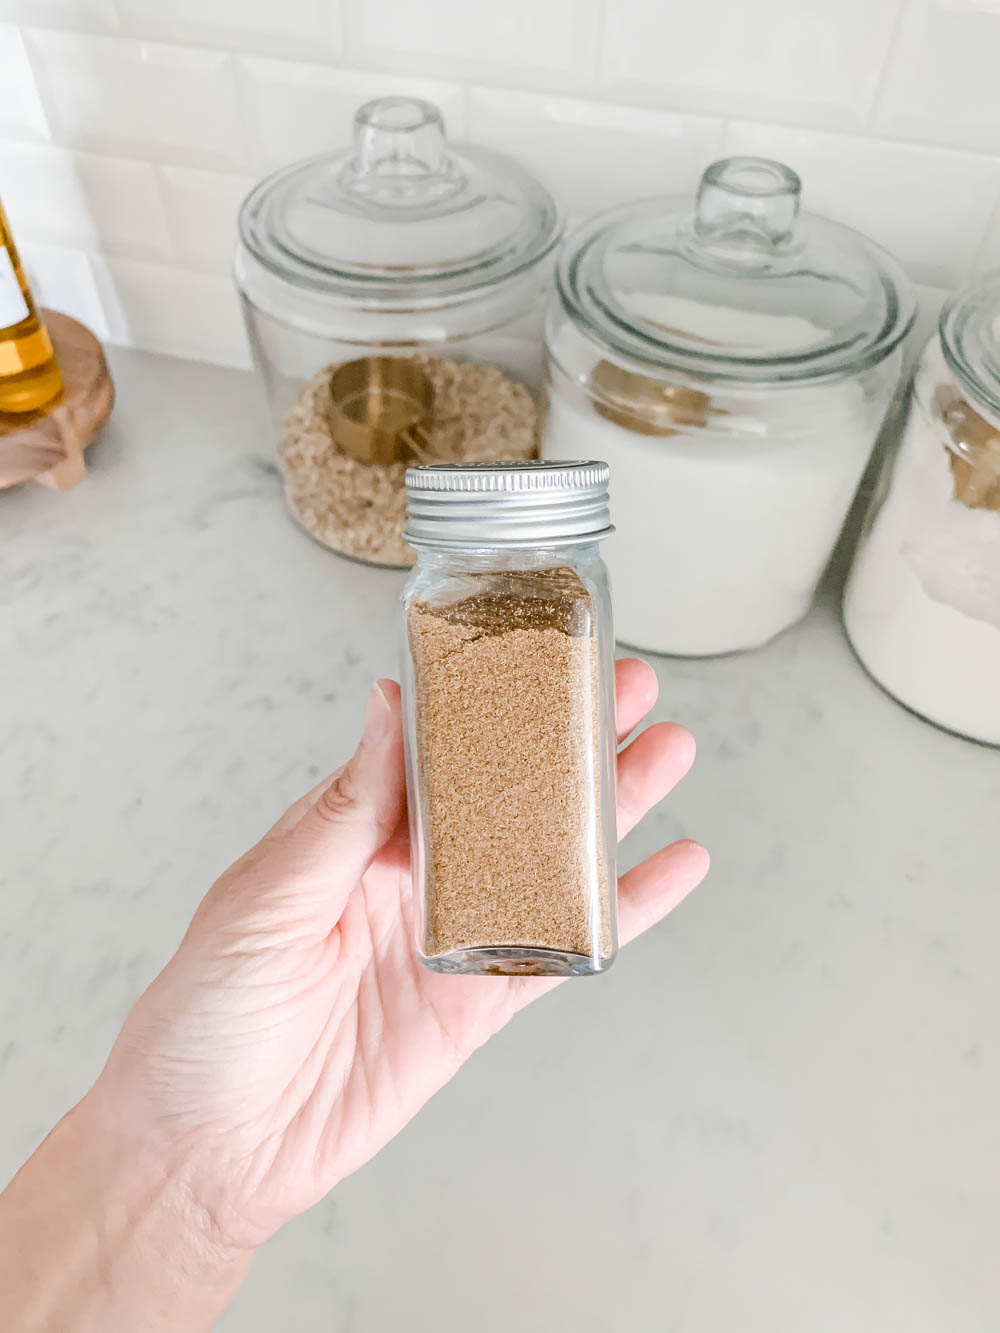 A before and after on how to purge a spice cabinet and the best organization products to use. #spicecabinet #kitchen #organization #ABlissfulNest